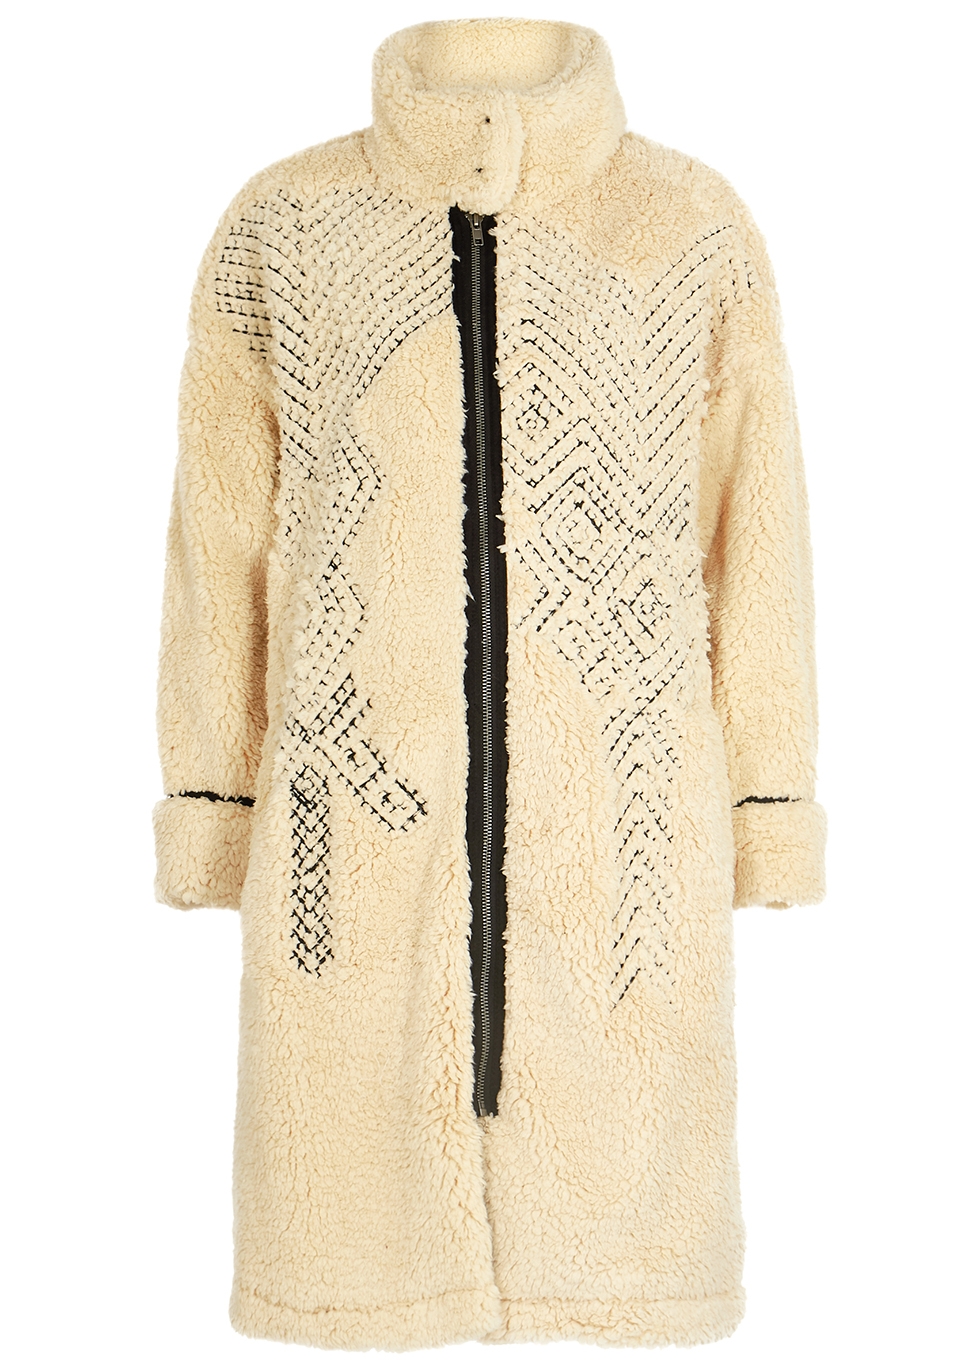 Avery embroidered faux shearling coat